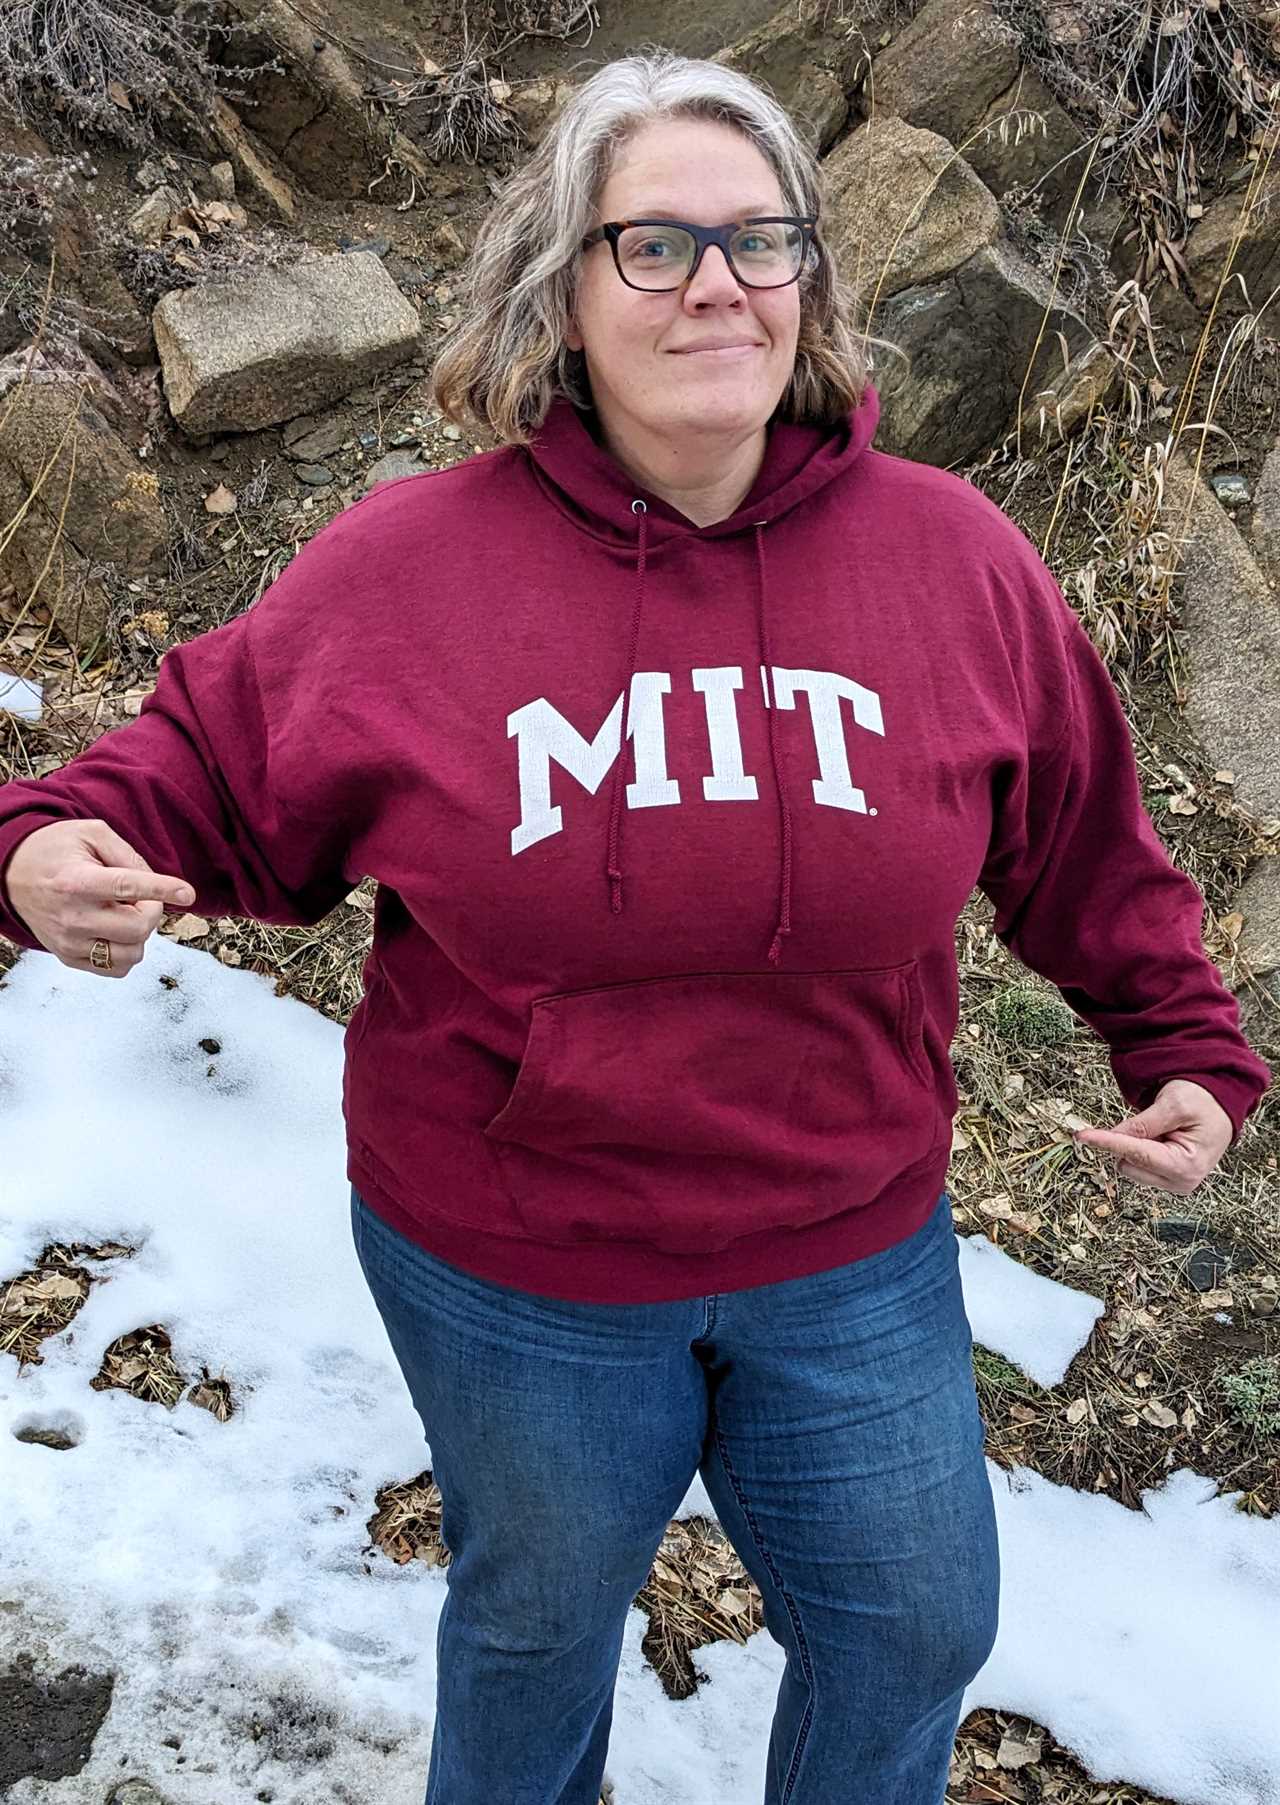 What’s one memento you kept from your time at MIT?